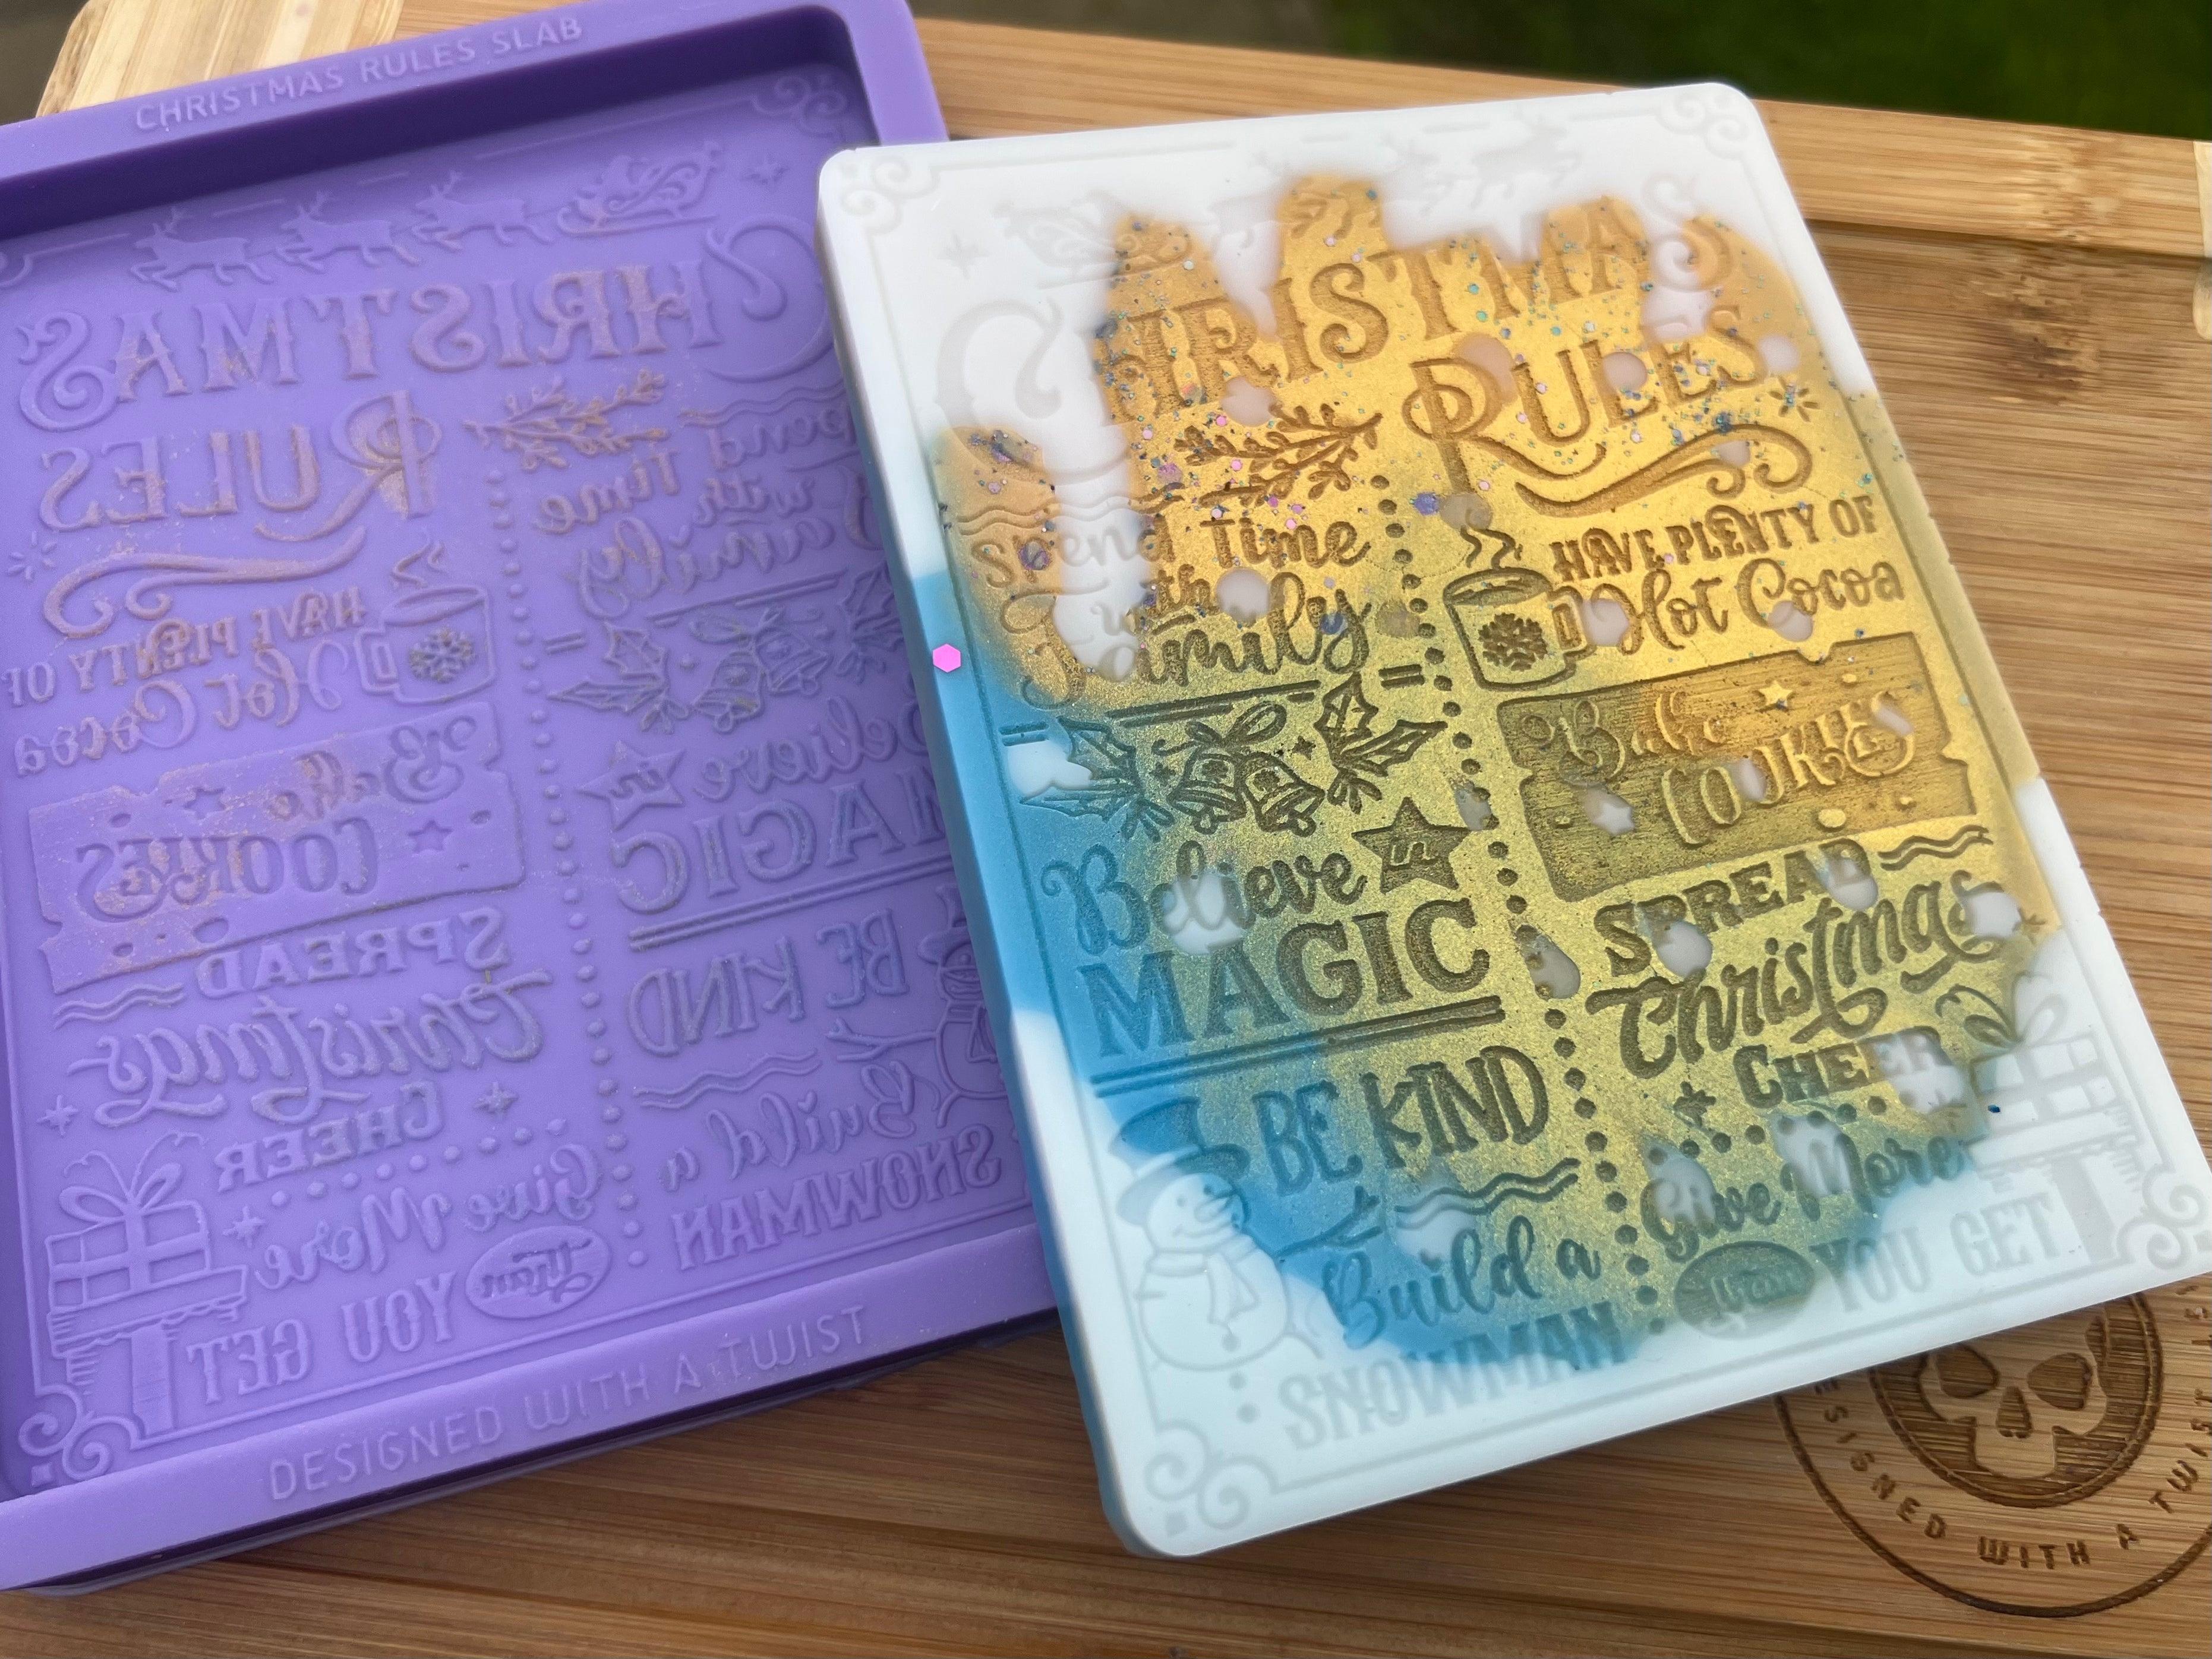 Christmas Rules Mini Slab Silicone Mold - Designed with a Twist - Top quality silicone molds made in the UK.